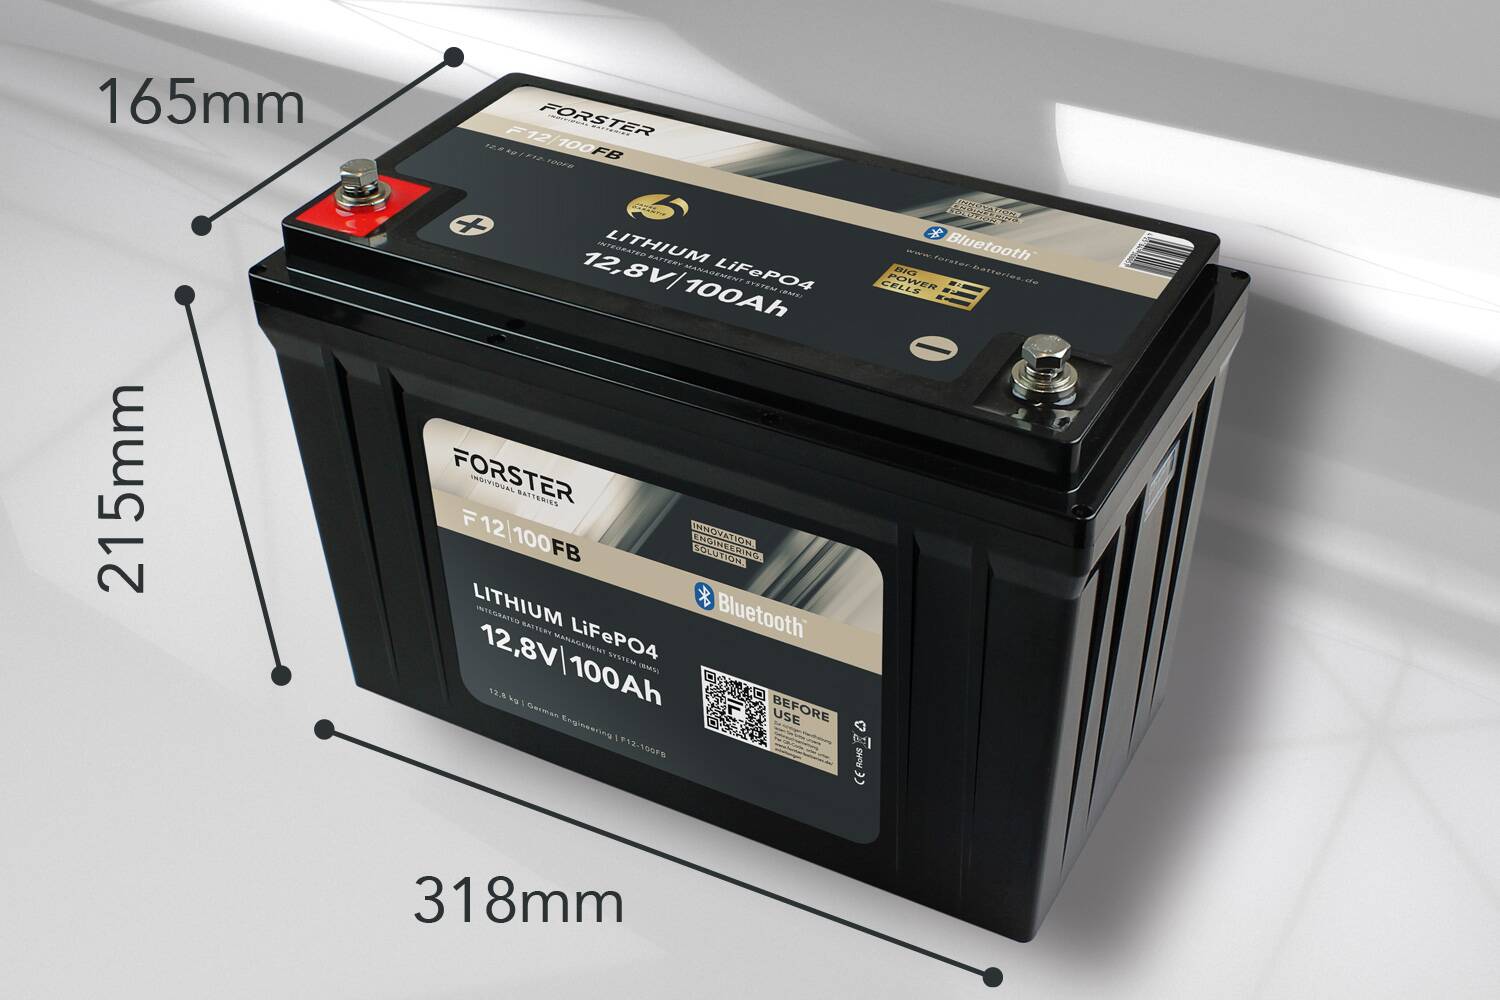 FORSTER 100Ah 12,8V LiFePO4 Lithium Batterie 100A-BMS Smart Bluetooth 1280Wh